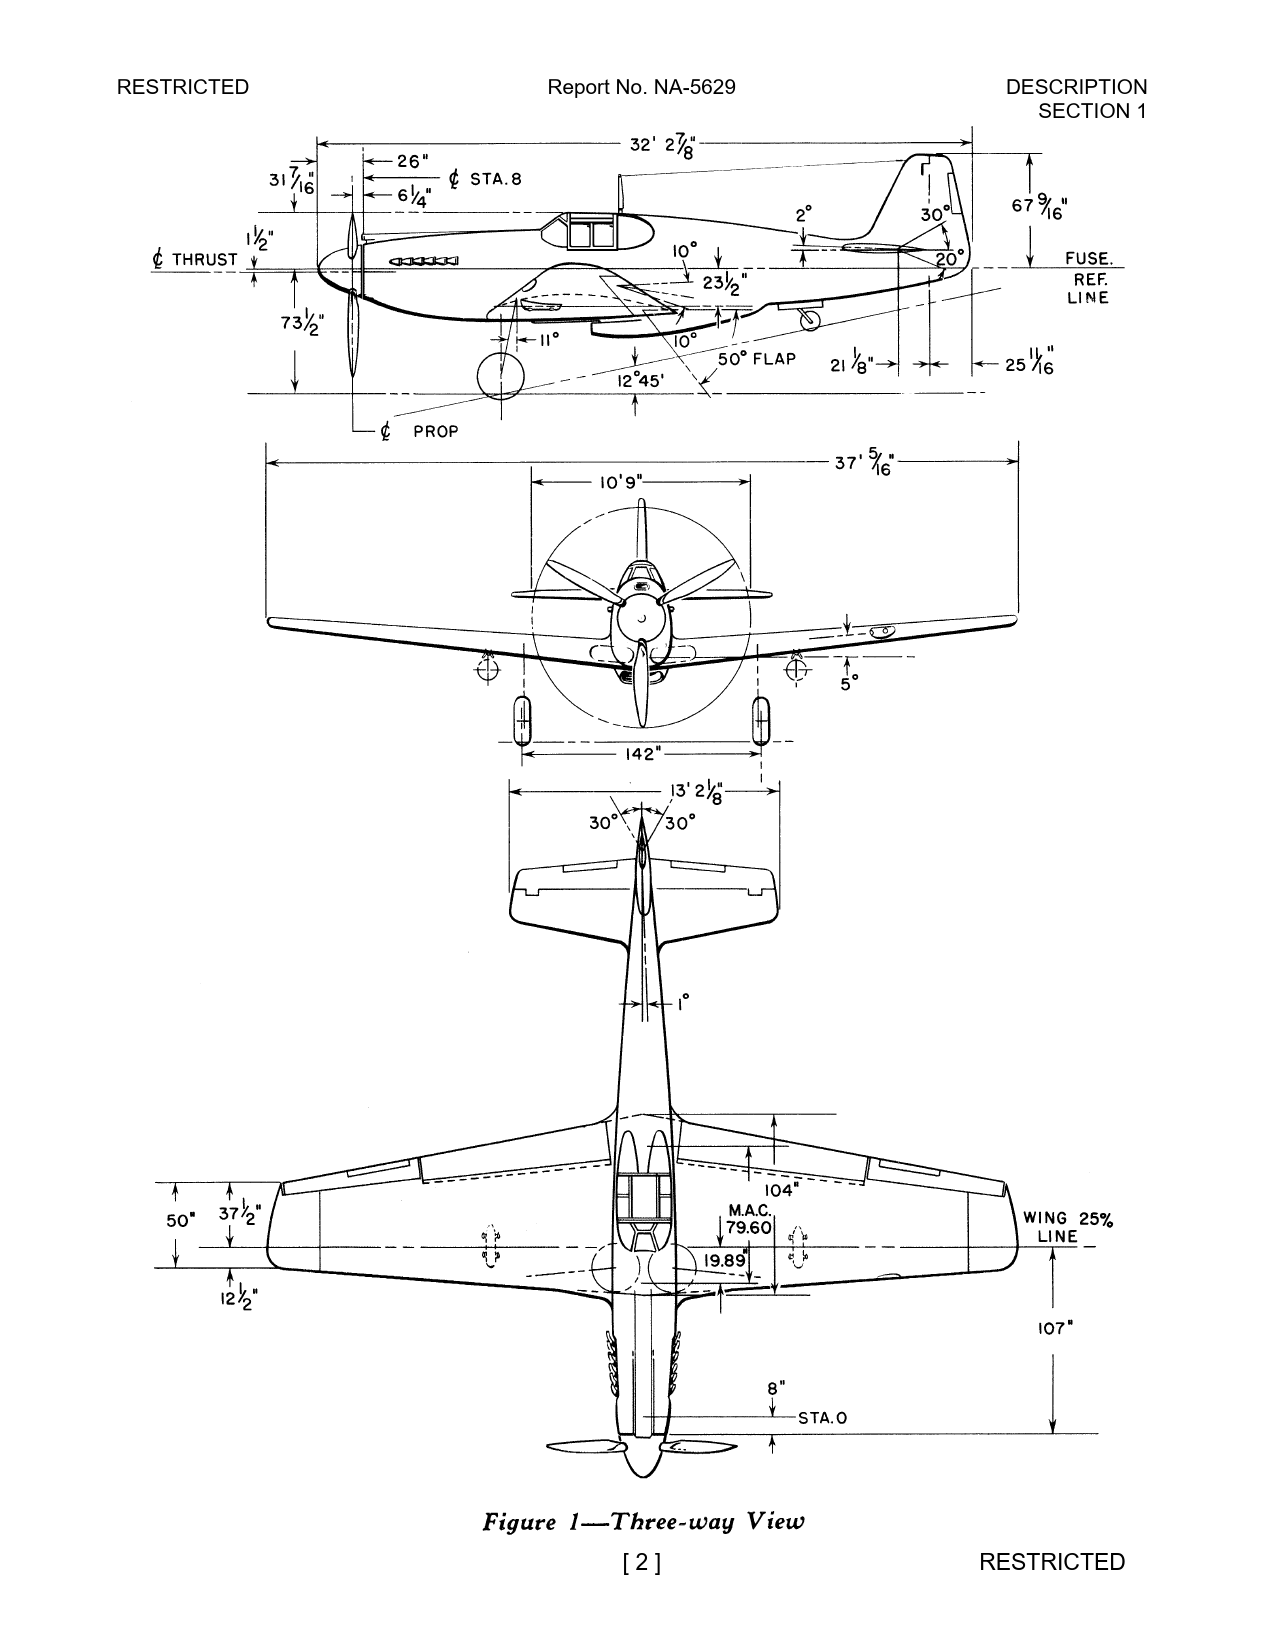 Sample page 16 from AirCorps Library document: Manual of Instructions for the Maintenance of the P-51A